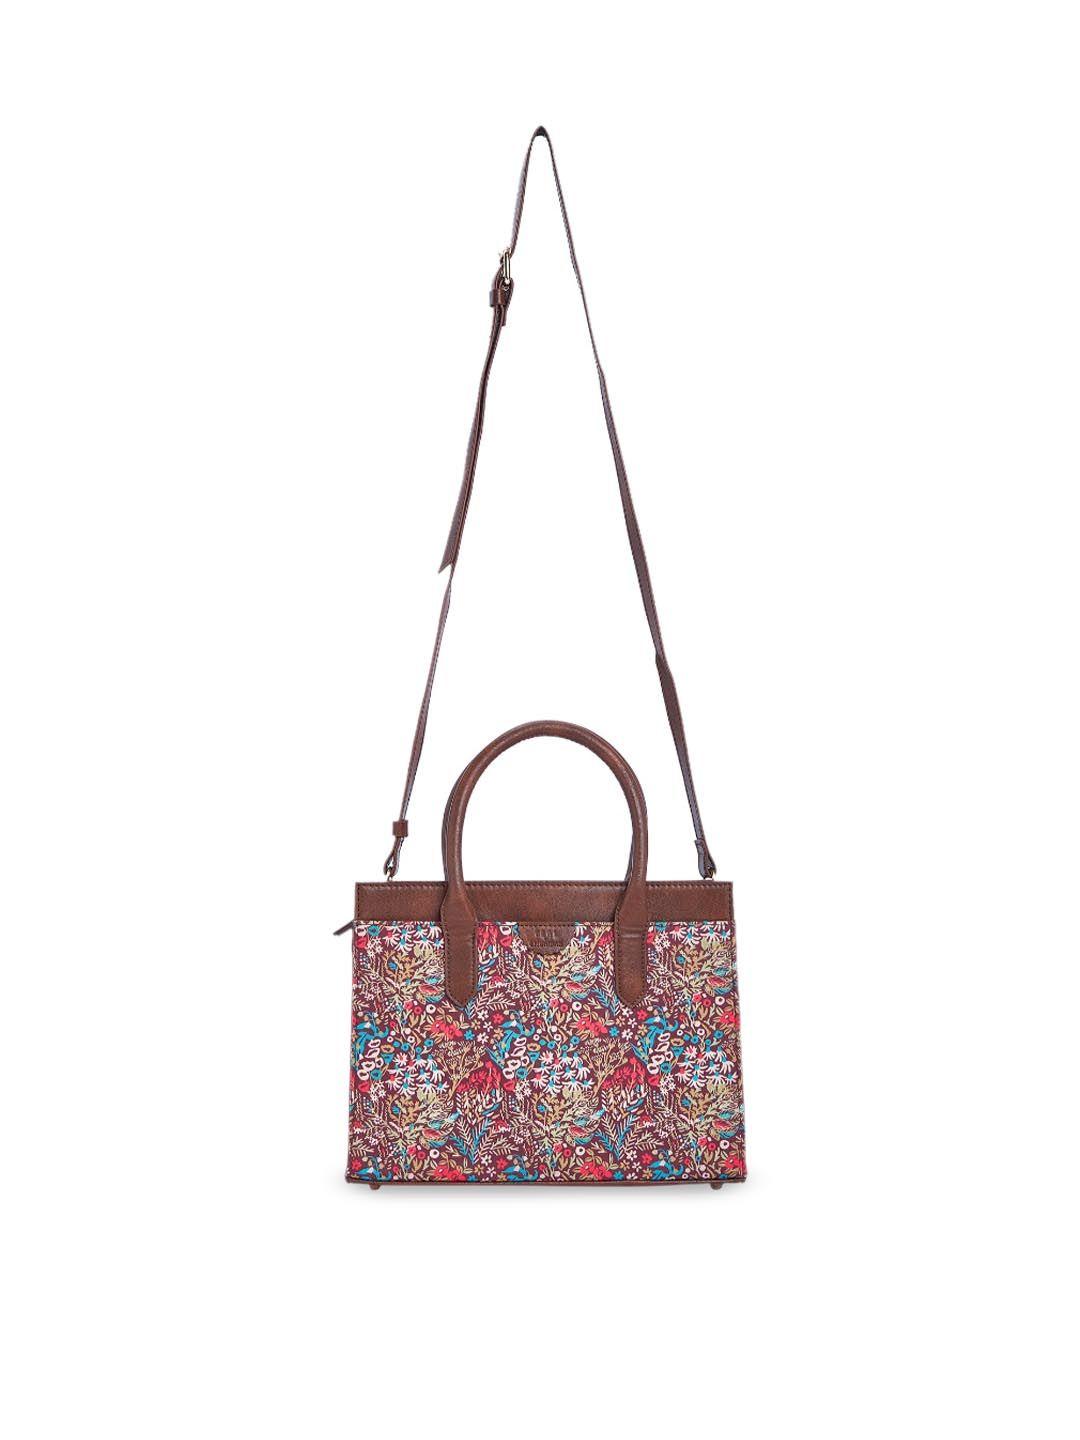 teal by chumbak floral printed structured handheld bag